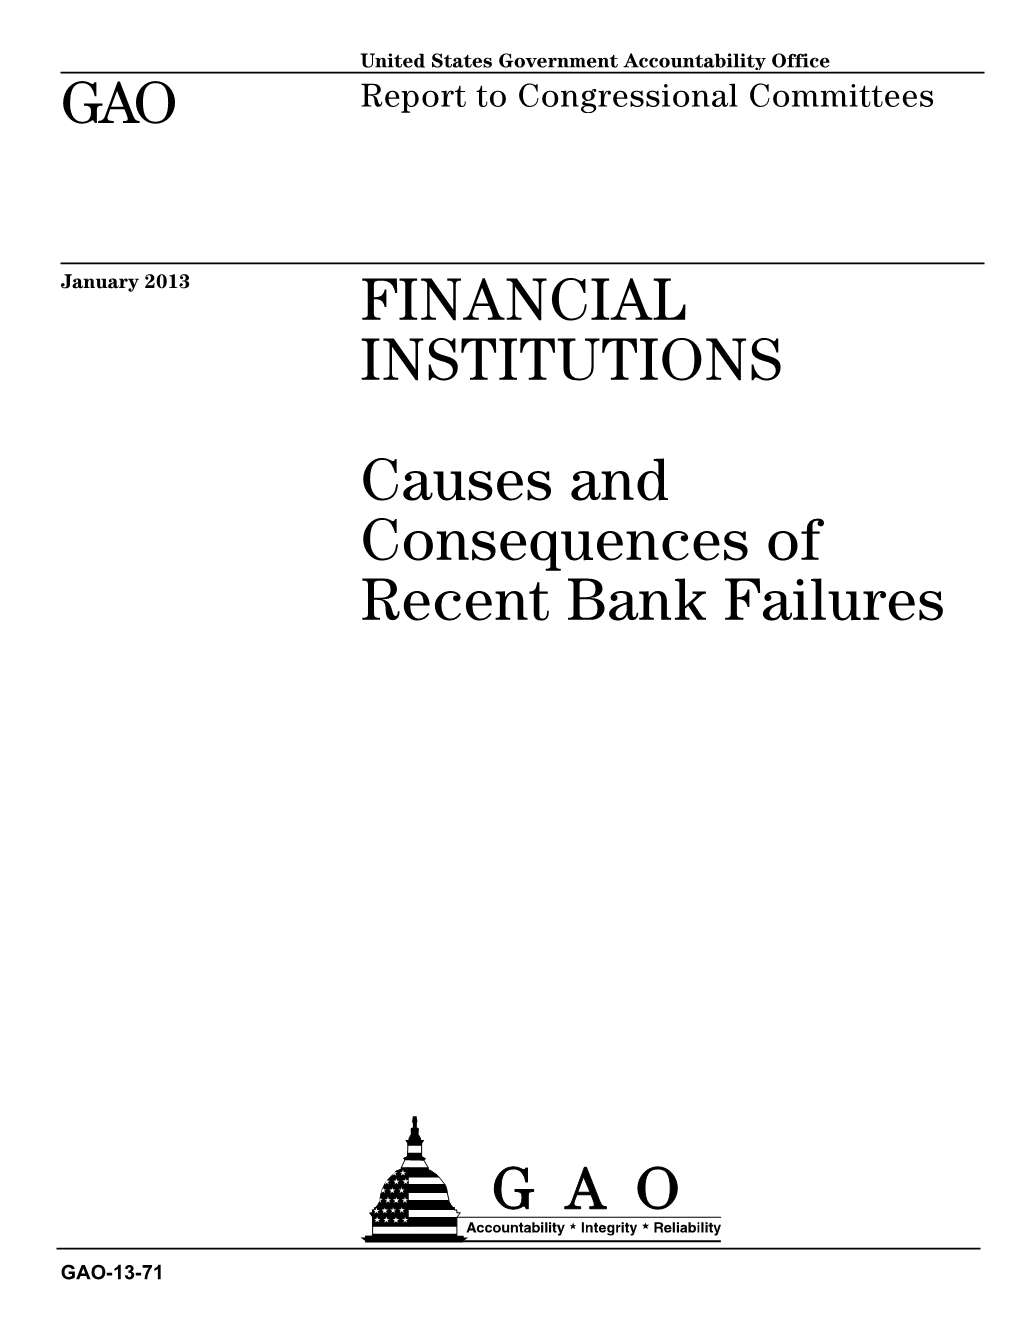 Causes and Consequences of Recent Bank Failures